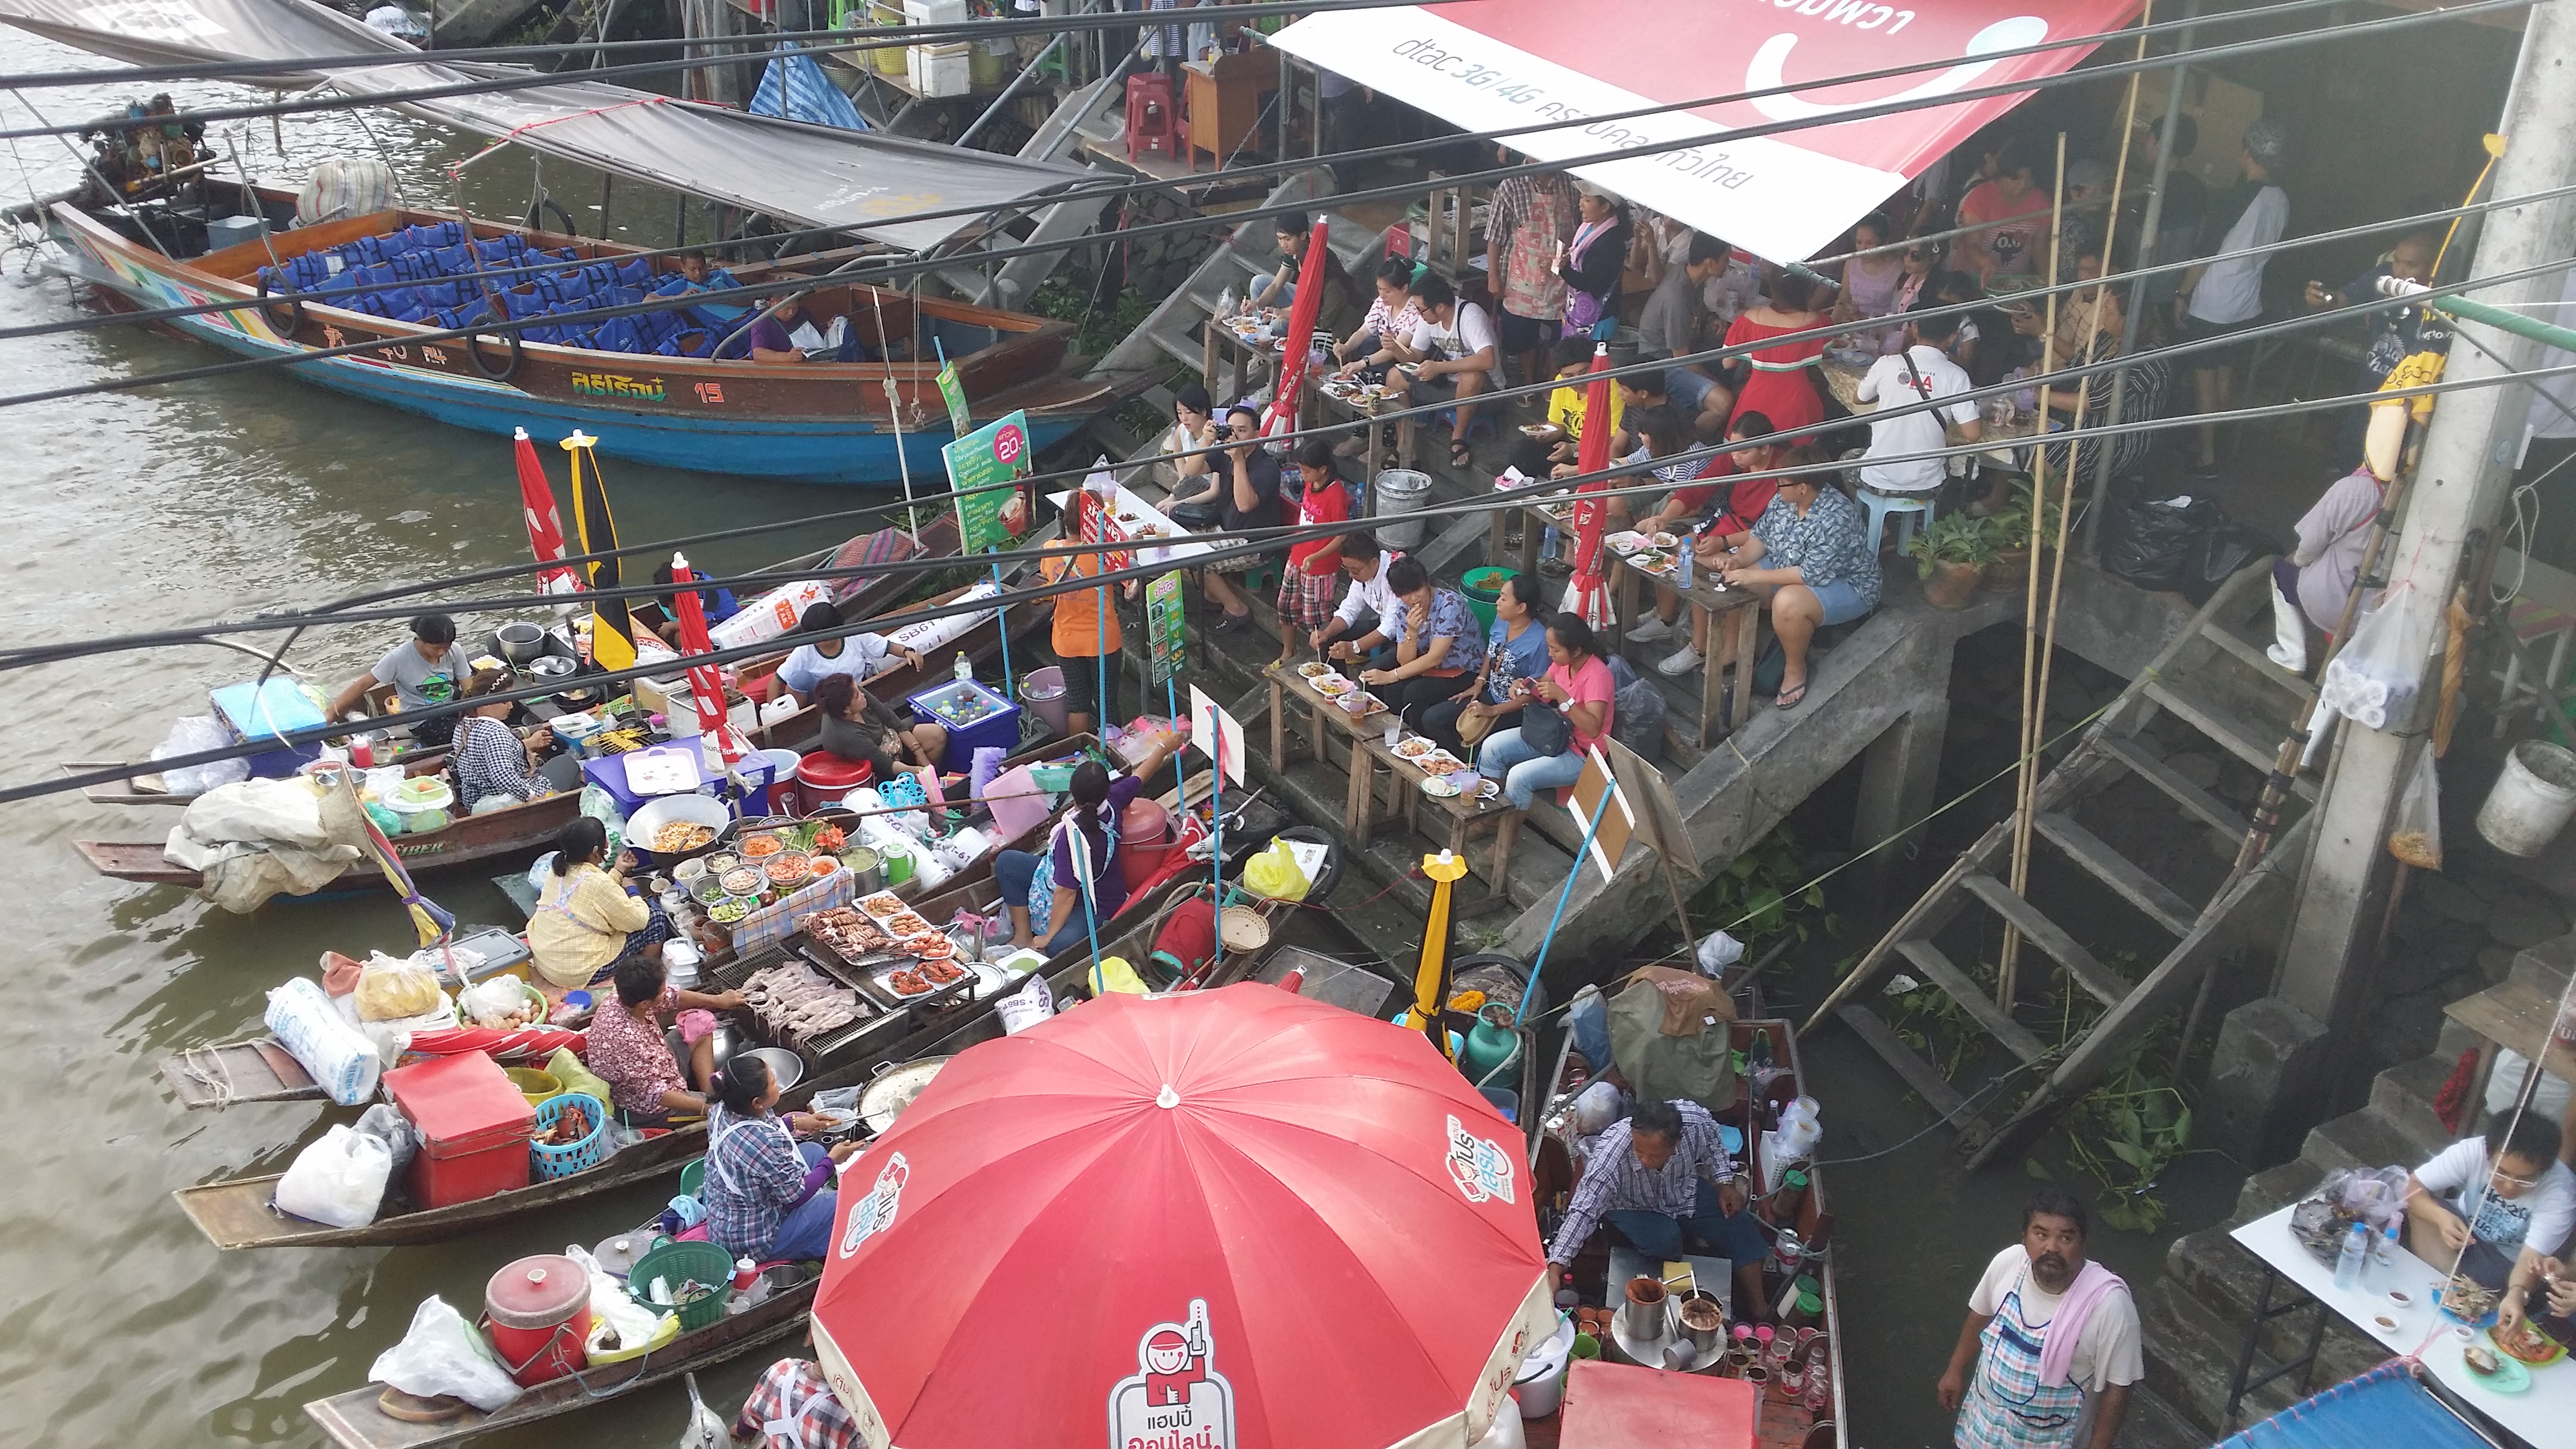 Amphawa floating Markets located on the Mae Klong River is one of the most popular floating markets near Bangkok. Damnoen Saduak still trumps Amphawa for size, but does not match up for authenticity where most of the visitors are Thai's. Amphawa markets are located only 50 km from Bangkok, it is a haven for Thai's wanting to escape Bangkok on the weekends and now days stretches well into the surrounding streets. One of the big drawcards for the markets is of course the opportunity to eat seafood grilled on wooden boats moored around the famous narrow bridge. Tucking into the seafood is a must, with a huge array of prawns, shellfish and squid available from noon until late into the evening. Customers who dine on the seafood can perch themselves on rows of narrow steps leading down to the river below, and your meal will be brought you do directly from the boat it is cooked on. There are many restaurants available along the river, with many featuring balconies allowing you to take in the sights and smells of the bustling market. Expect to be pushed and shoved around as you shop through the market stalls, when this place is busy, walking bodies grind to a halt. You can expect to see all the usual garb in the market stalls, but there will be many foods for sale that you will not find in many other markets. With Thai's naturally having such a sweet tooth, there are a wide array of deserts available that you can snack on all day long. Another must do at the Amphawa Markets is to take the opportunity to jump on a longtail boat and do a tour of the temple that are scattered along the banks of the Mae Klong River. Many opportunities will be available to also move up the Khlongs which is great fun. We went on a 2 hour tour which was booked from one of the counters found near the bridge, it set us back 50thb per person for our 5 temple tour. Make sure the tour you take includes Wat Bang Koong, which if you have come all the way from Bangkok is worth the stop.